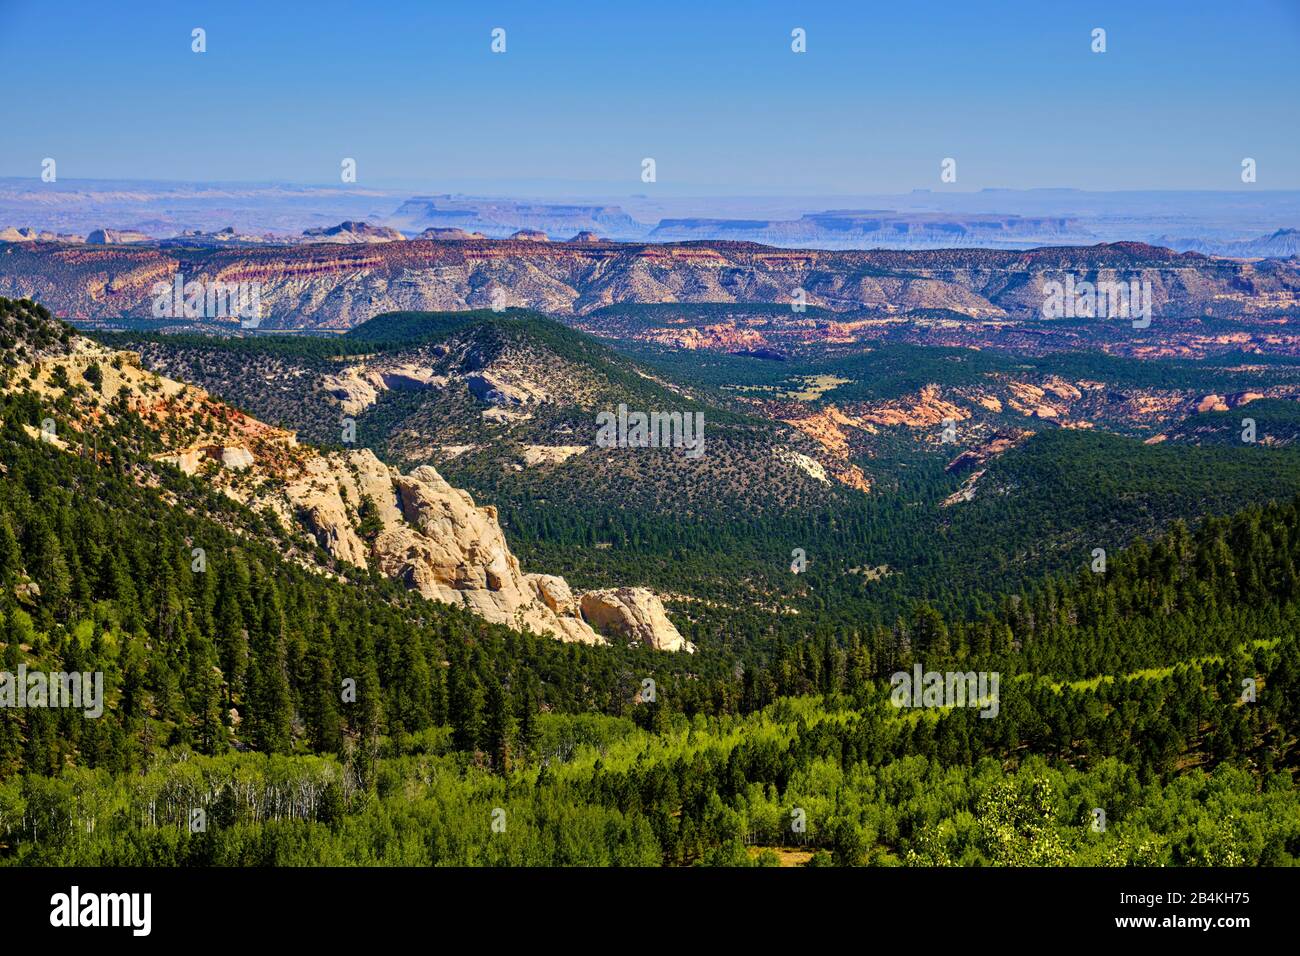 USA, United States of America, Red Canyon, Dixie National Forest, Bryce Canyon, Utah, Southwest USA, Utah State Route 12, Scenic Byway,Escalante, Capitol Reef National Park, Stock Photo